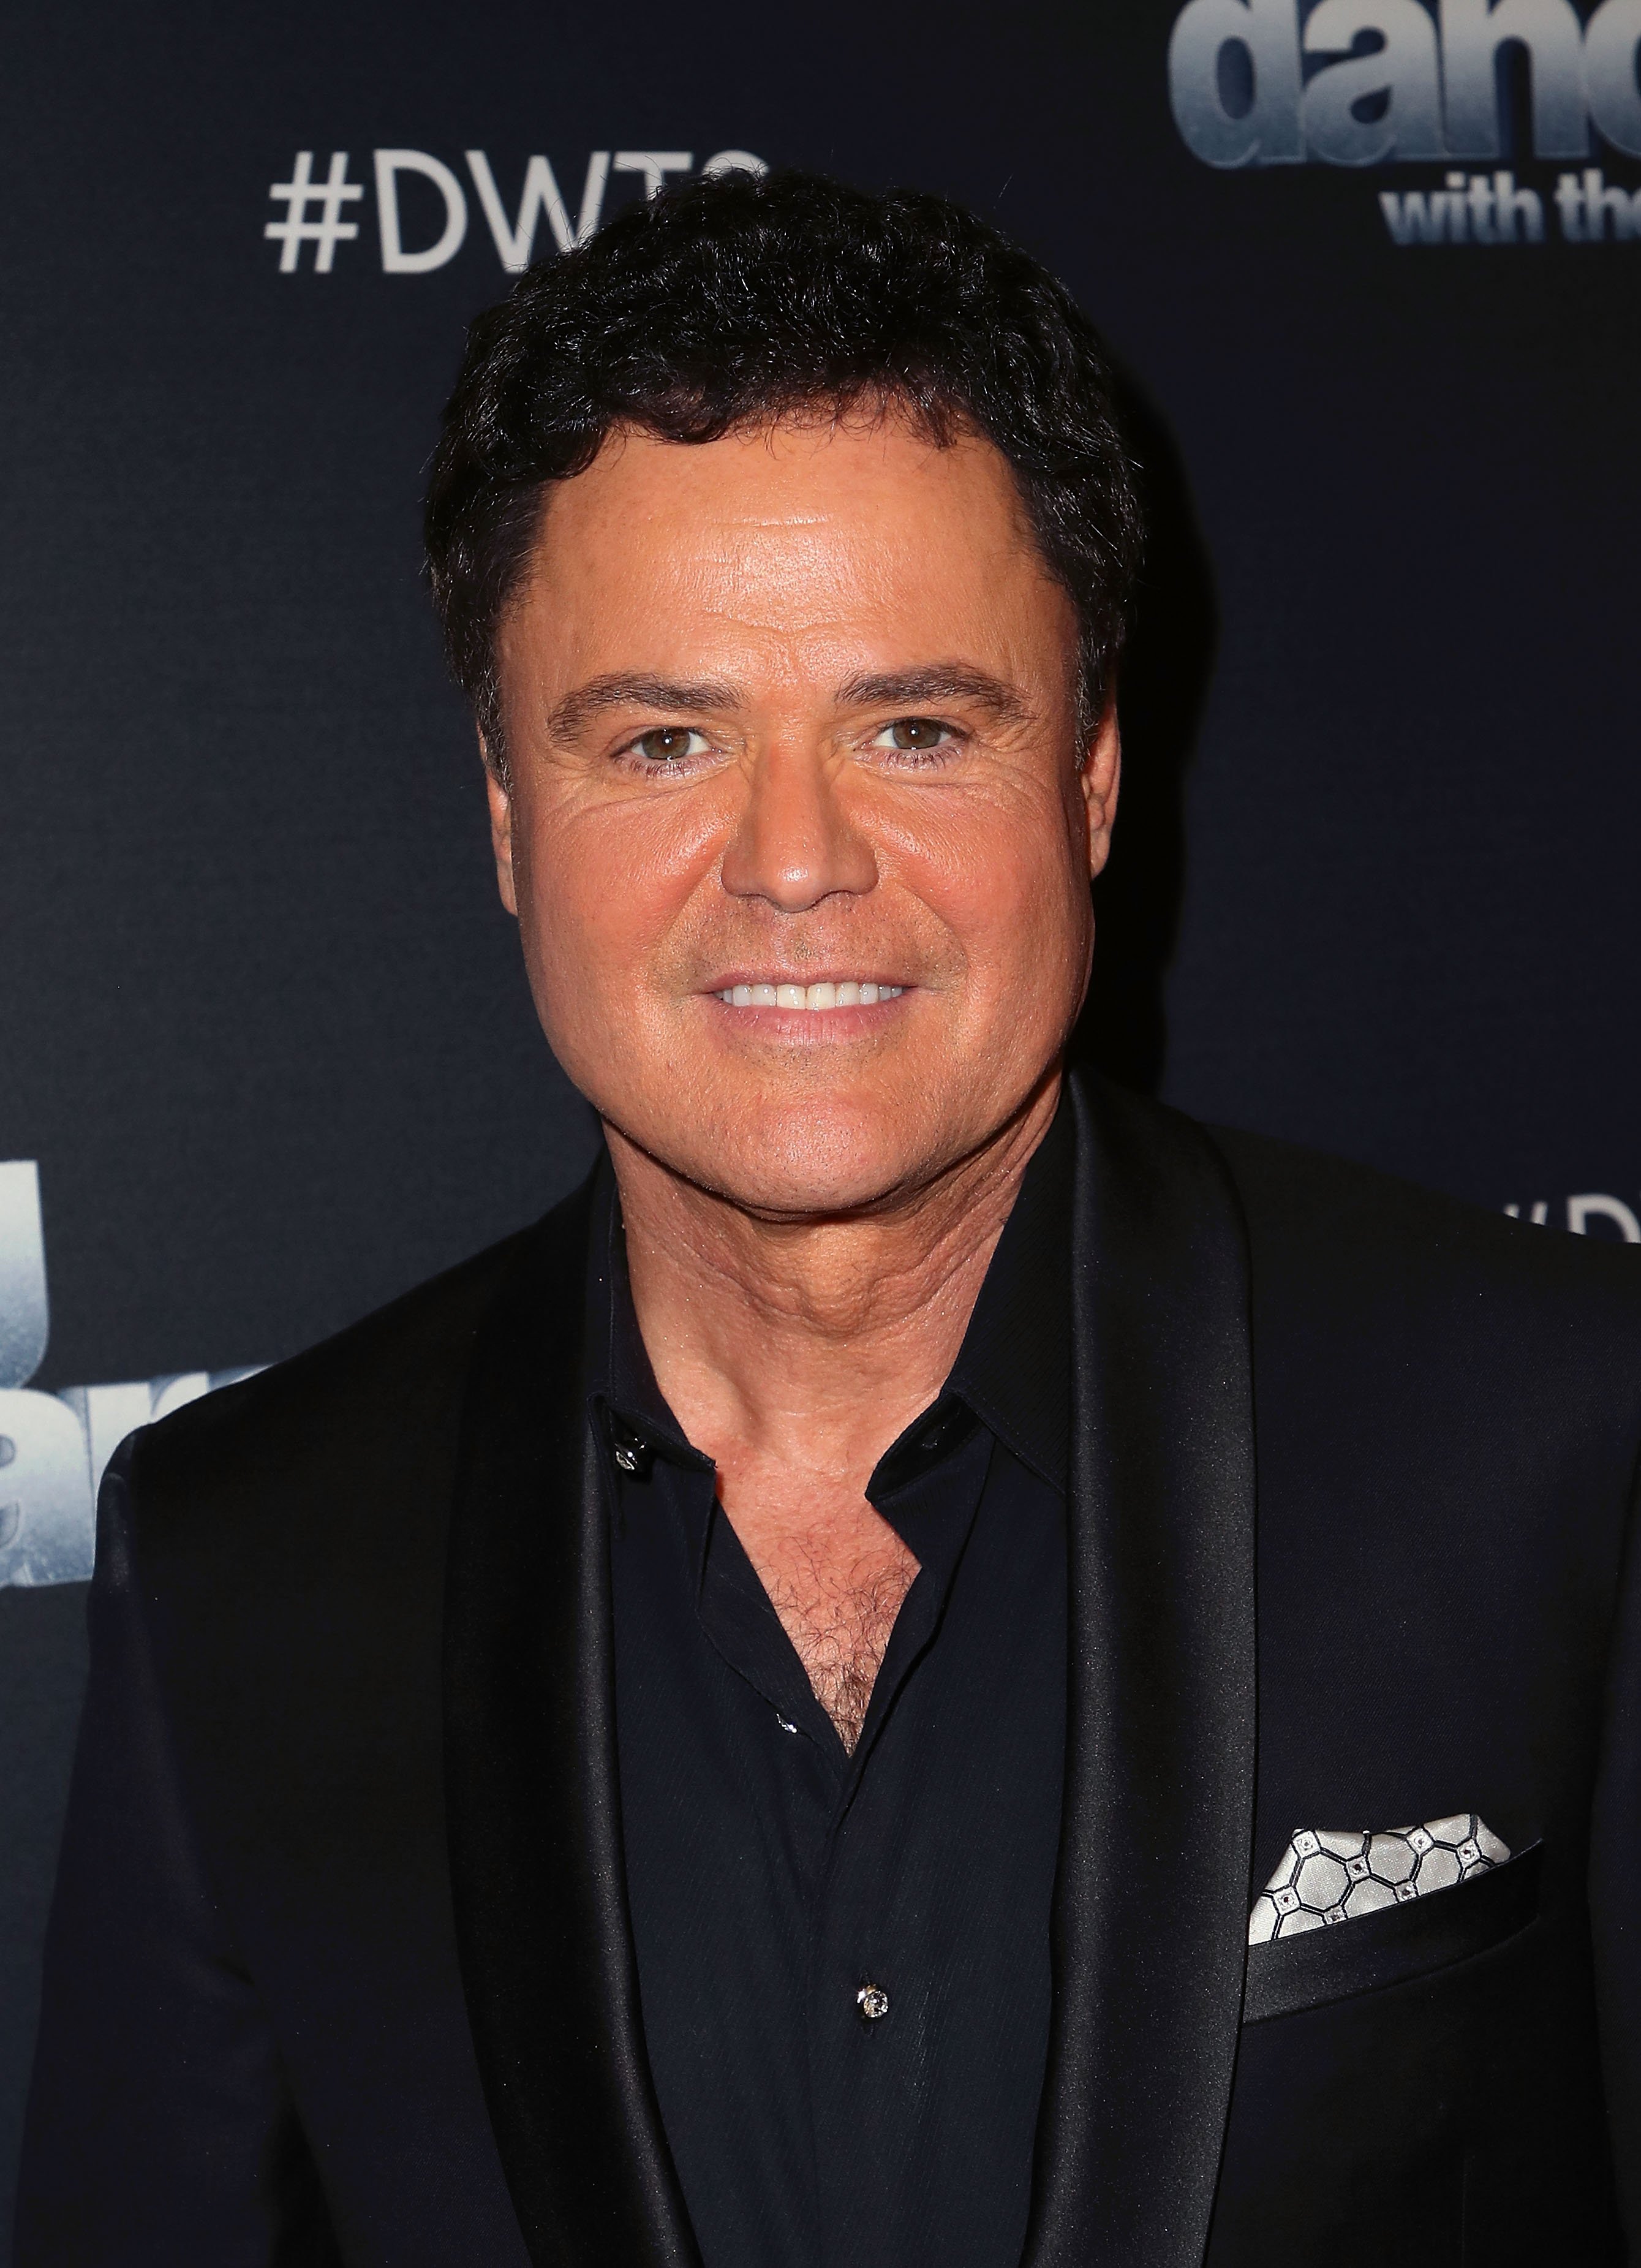 Donny Osmond Pays Touching Tribute to His 'Big Brother' Alan on His Birthday